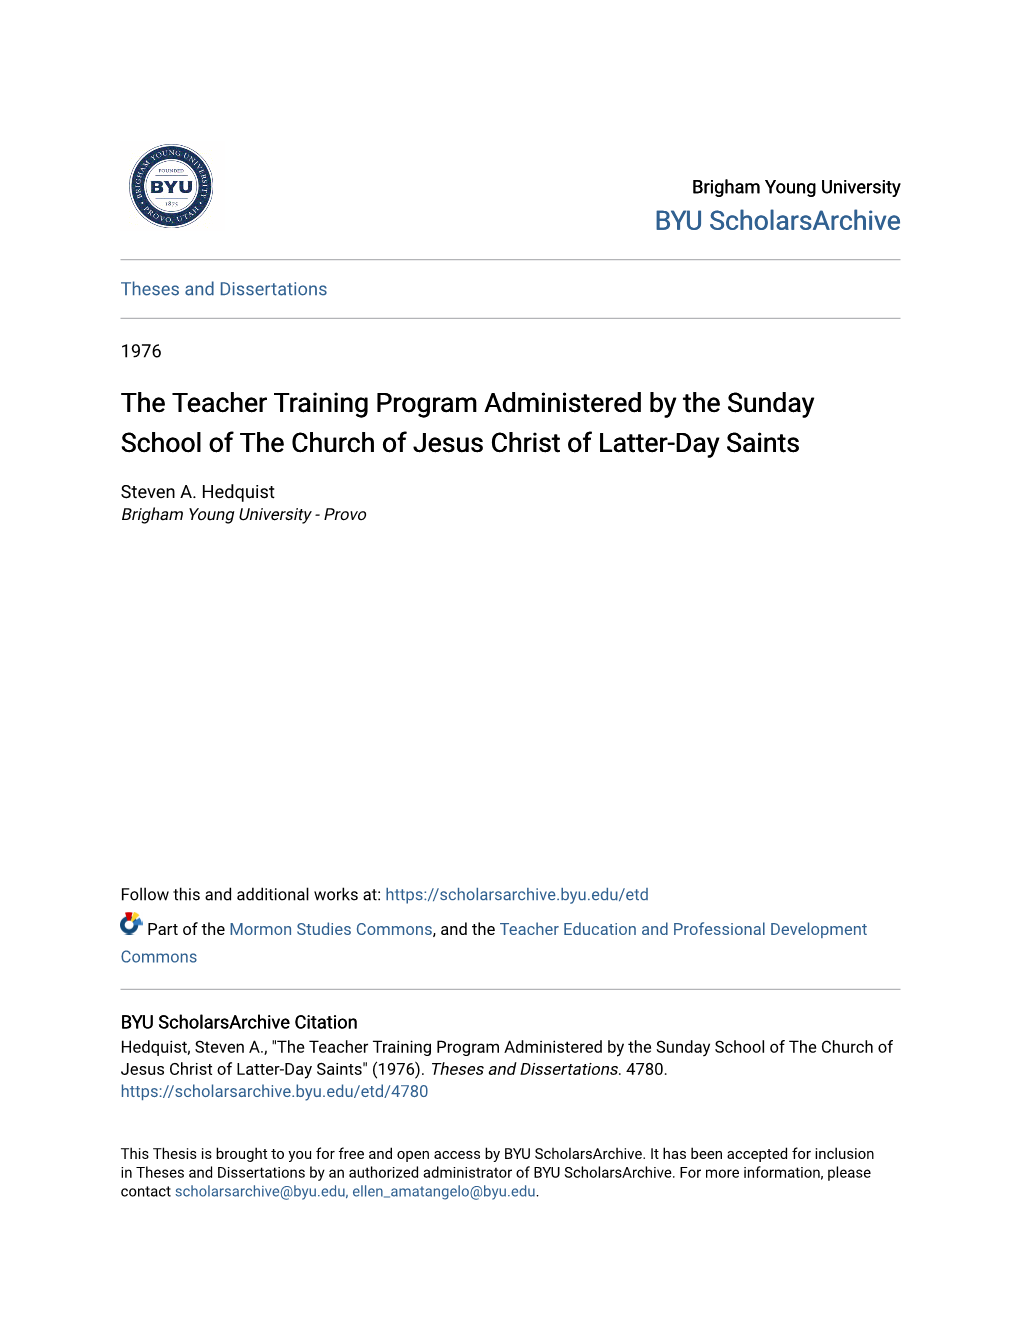 The Teacher Training Program Administered by the Sunday School of the Church of Jesus Christ of Latter-Day Saints